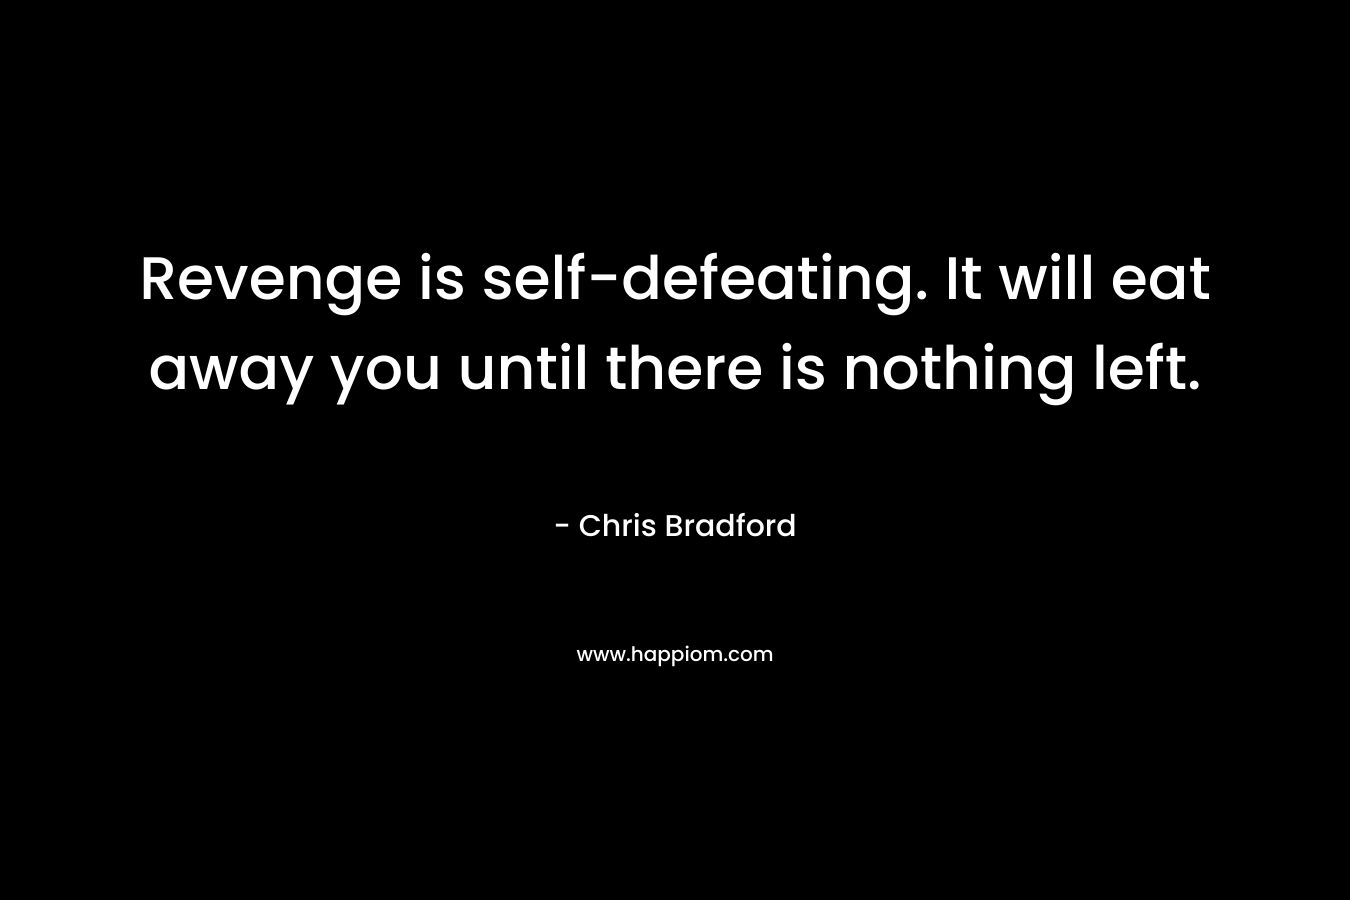 Revenge is self-defeating. It will eat away you until there is nothing left. – Chris Bradford